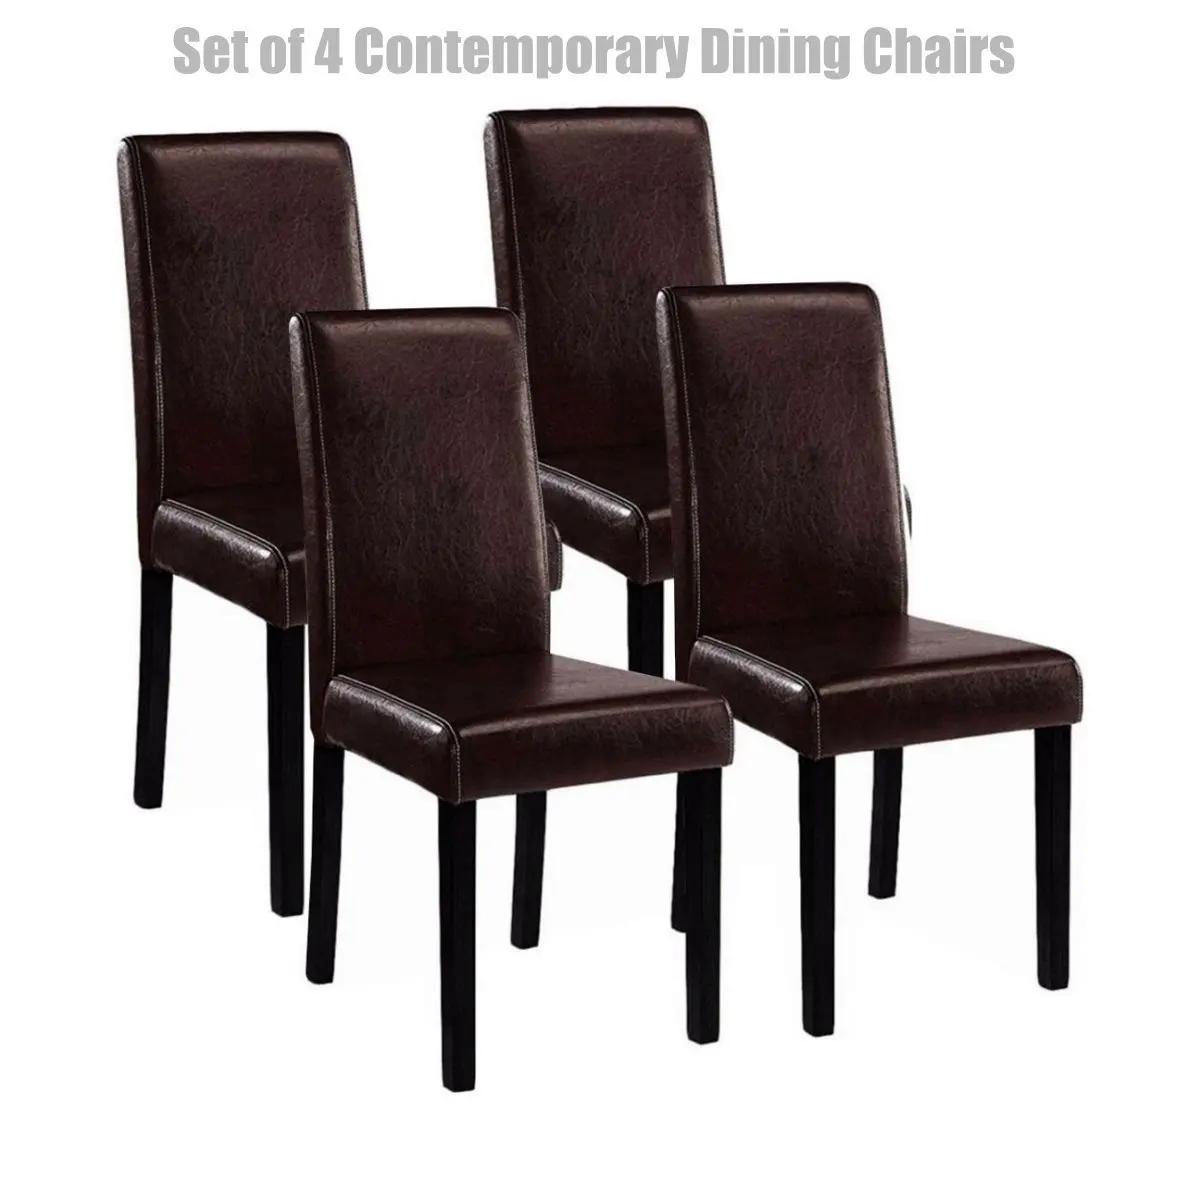 Buy Classic Contemporary Design Dining Chairs Durable Half PU Leather